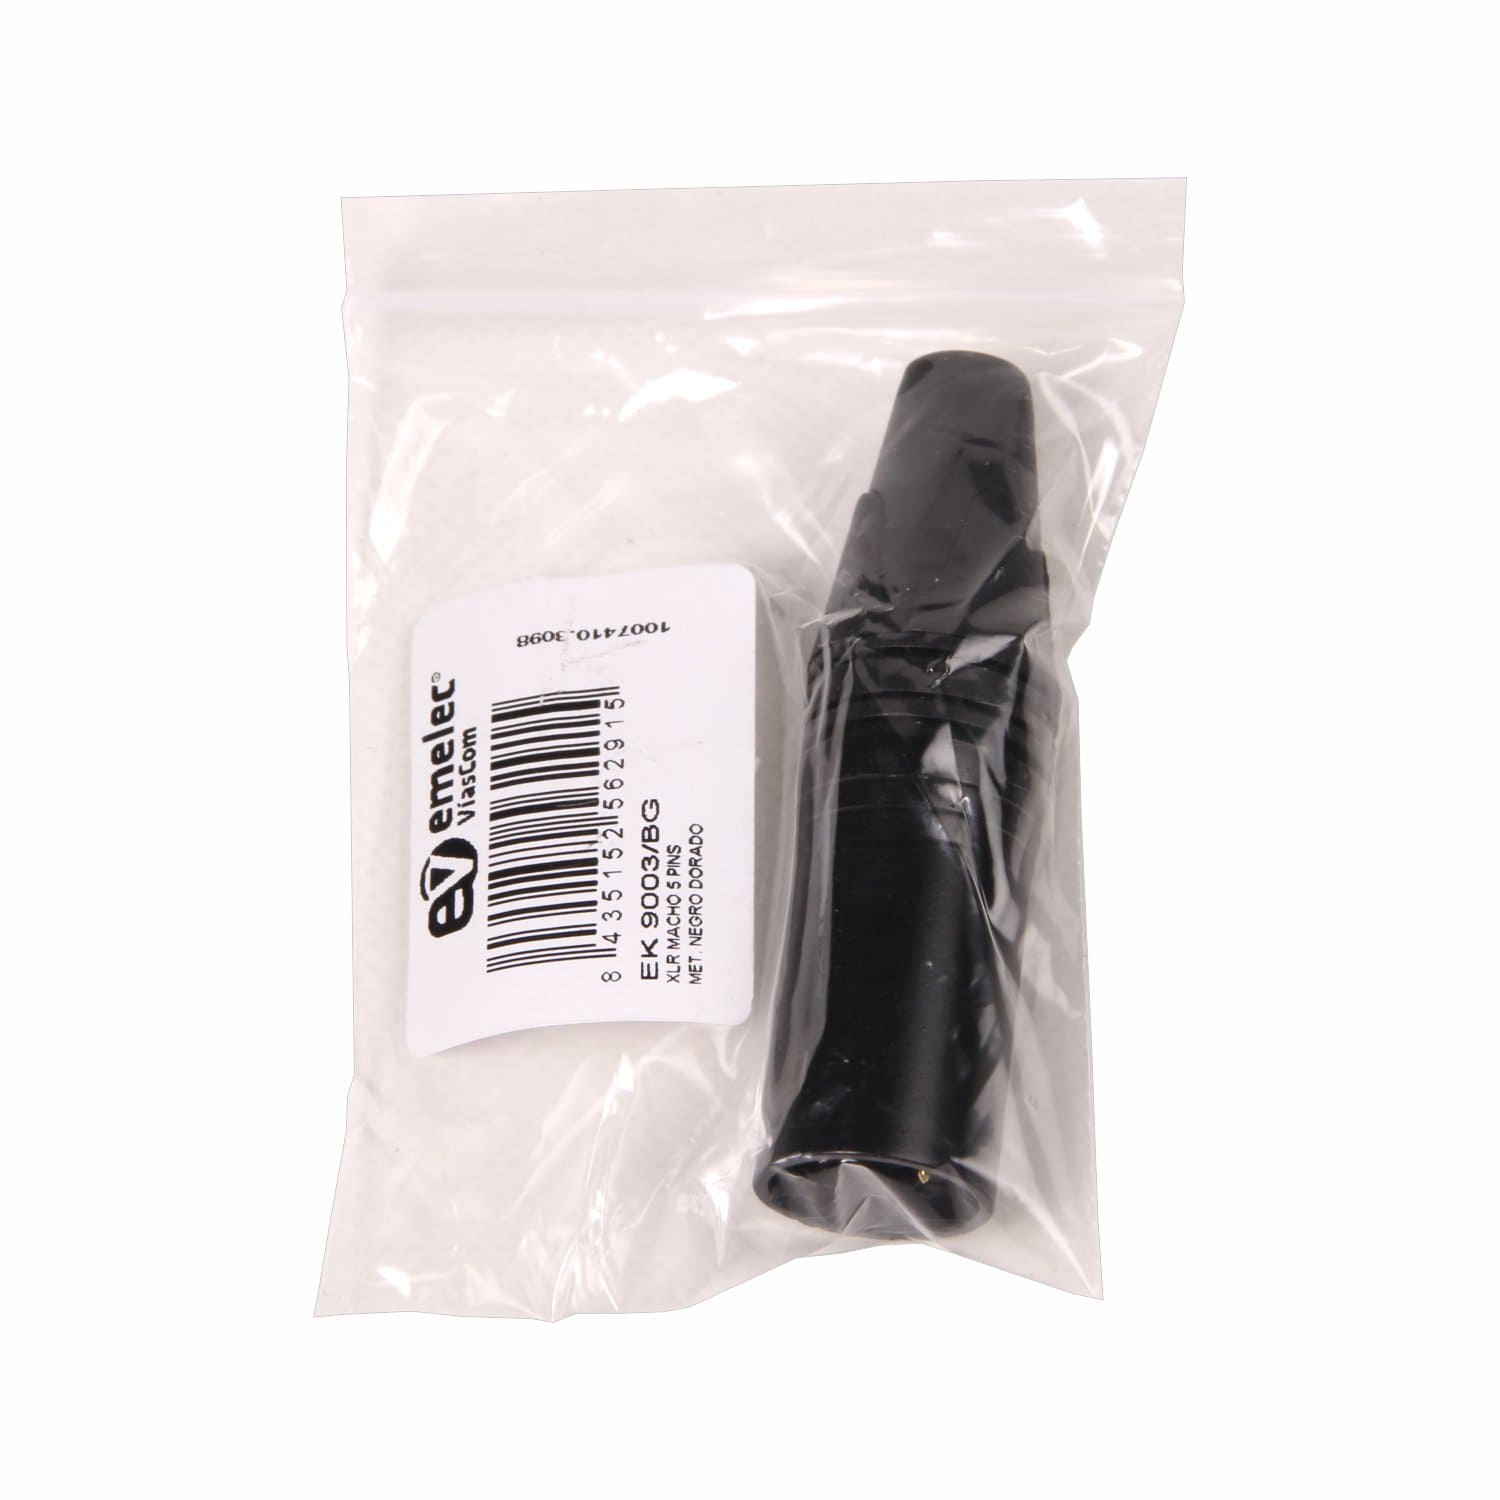 Plastic Bag with Black Male XLR Connector with 5 Gold Pins by Emelec ViaCom